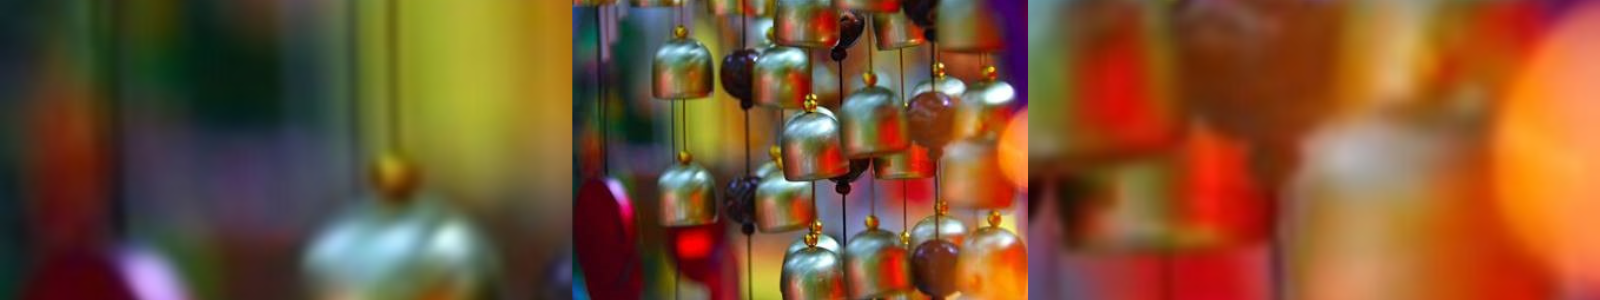 colorful hanging wind chimes